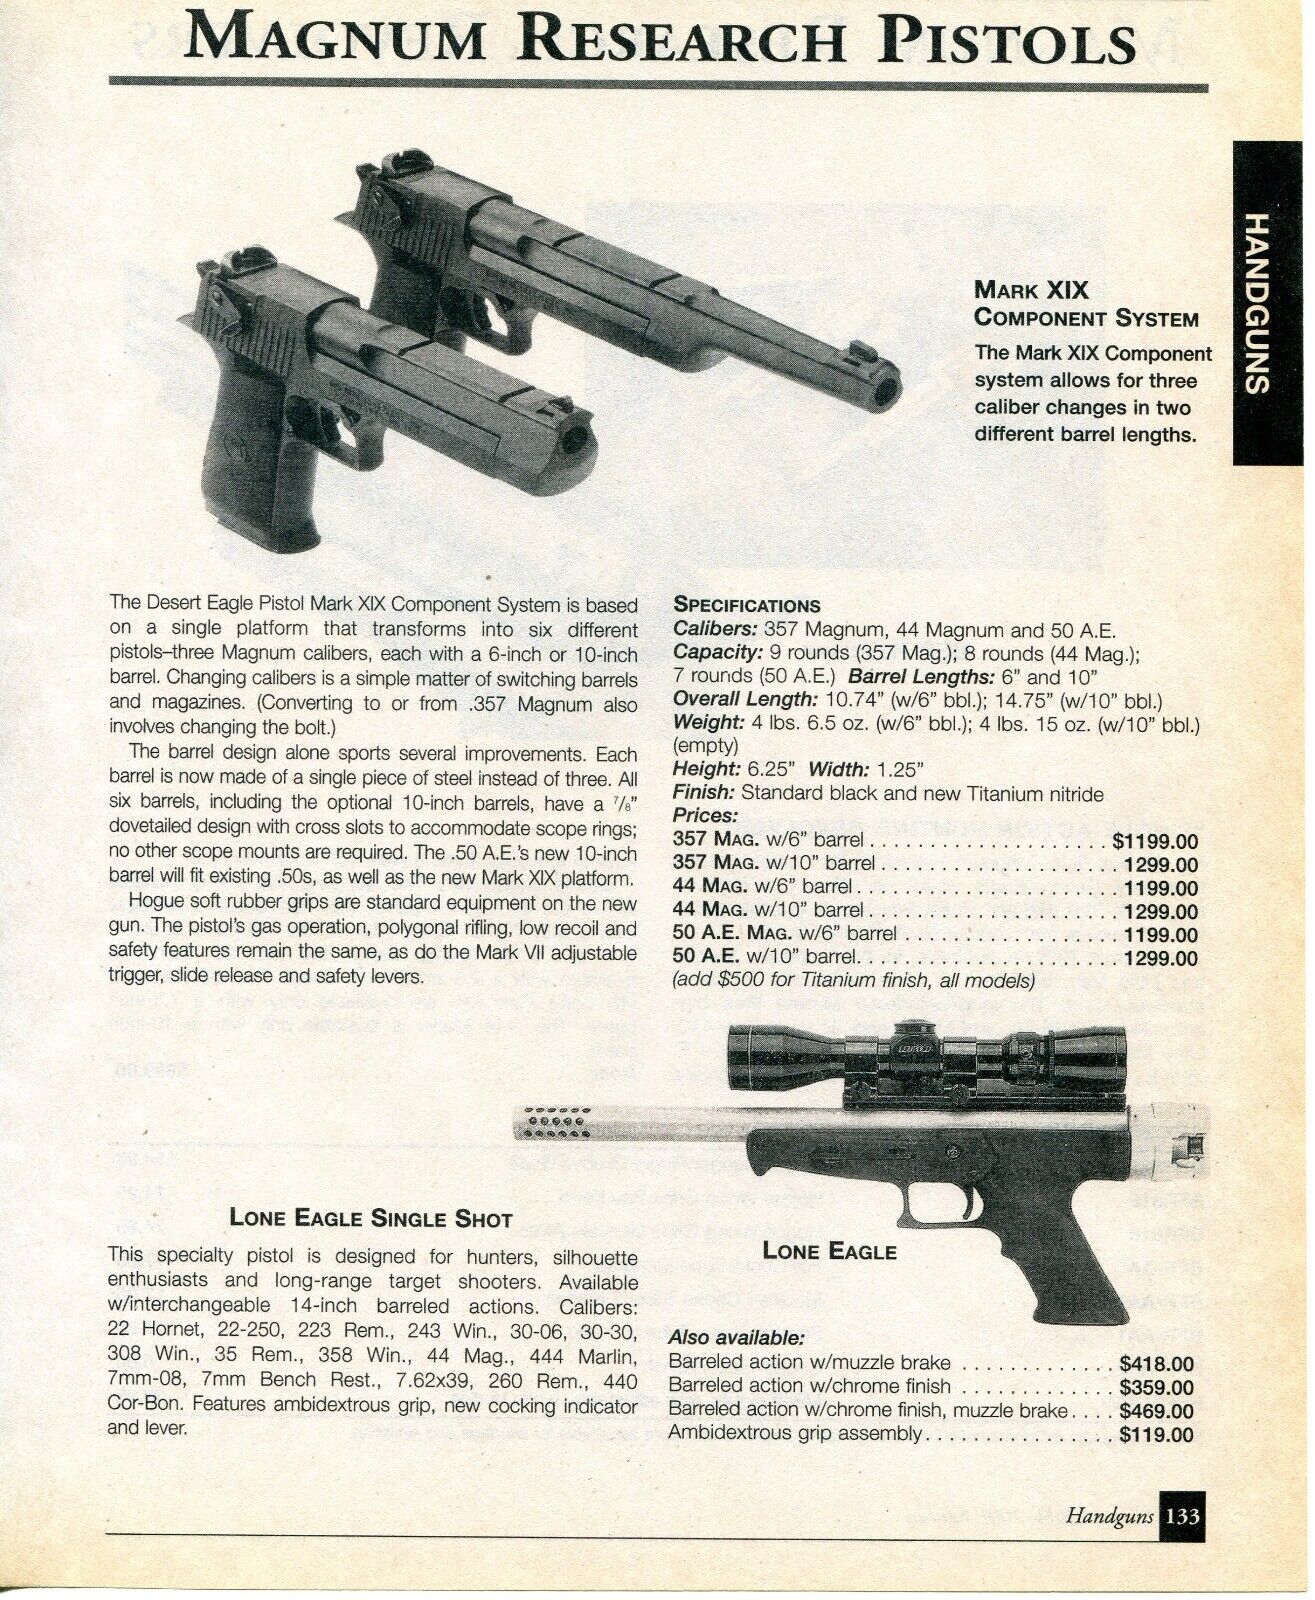 2001 Print Ad of Magnum Research Mark XIX Component System & Lone Eagle Pistol